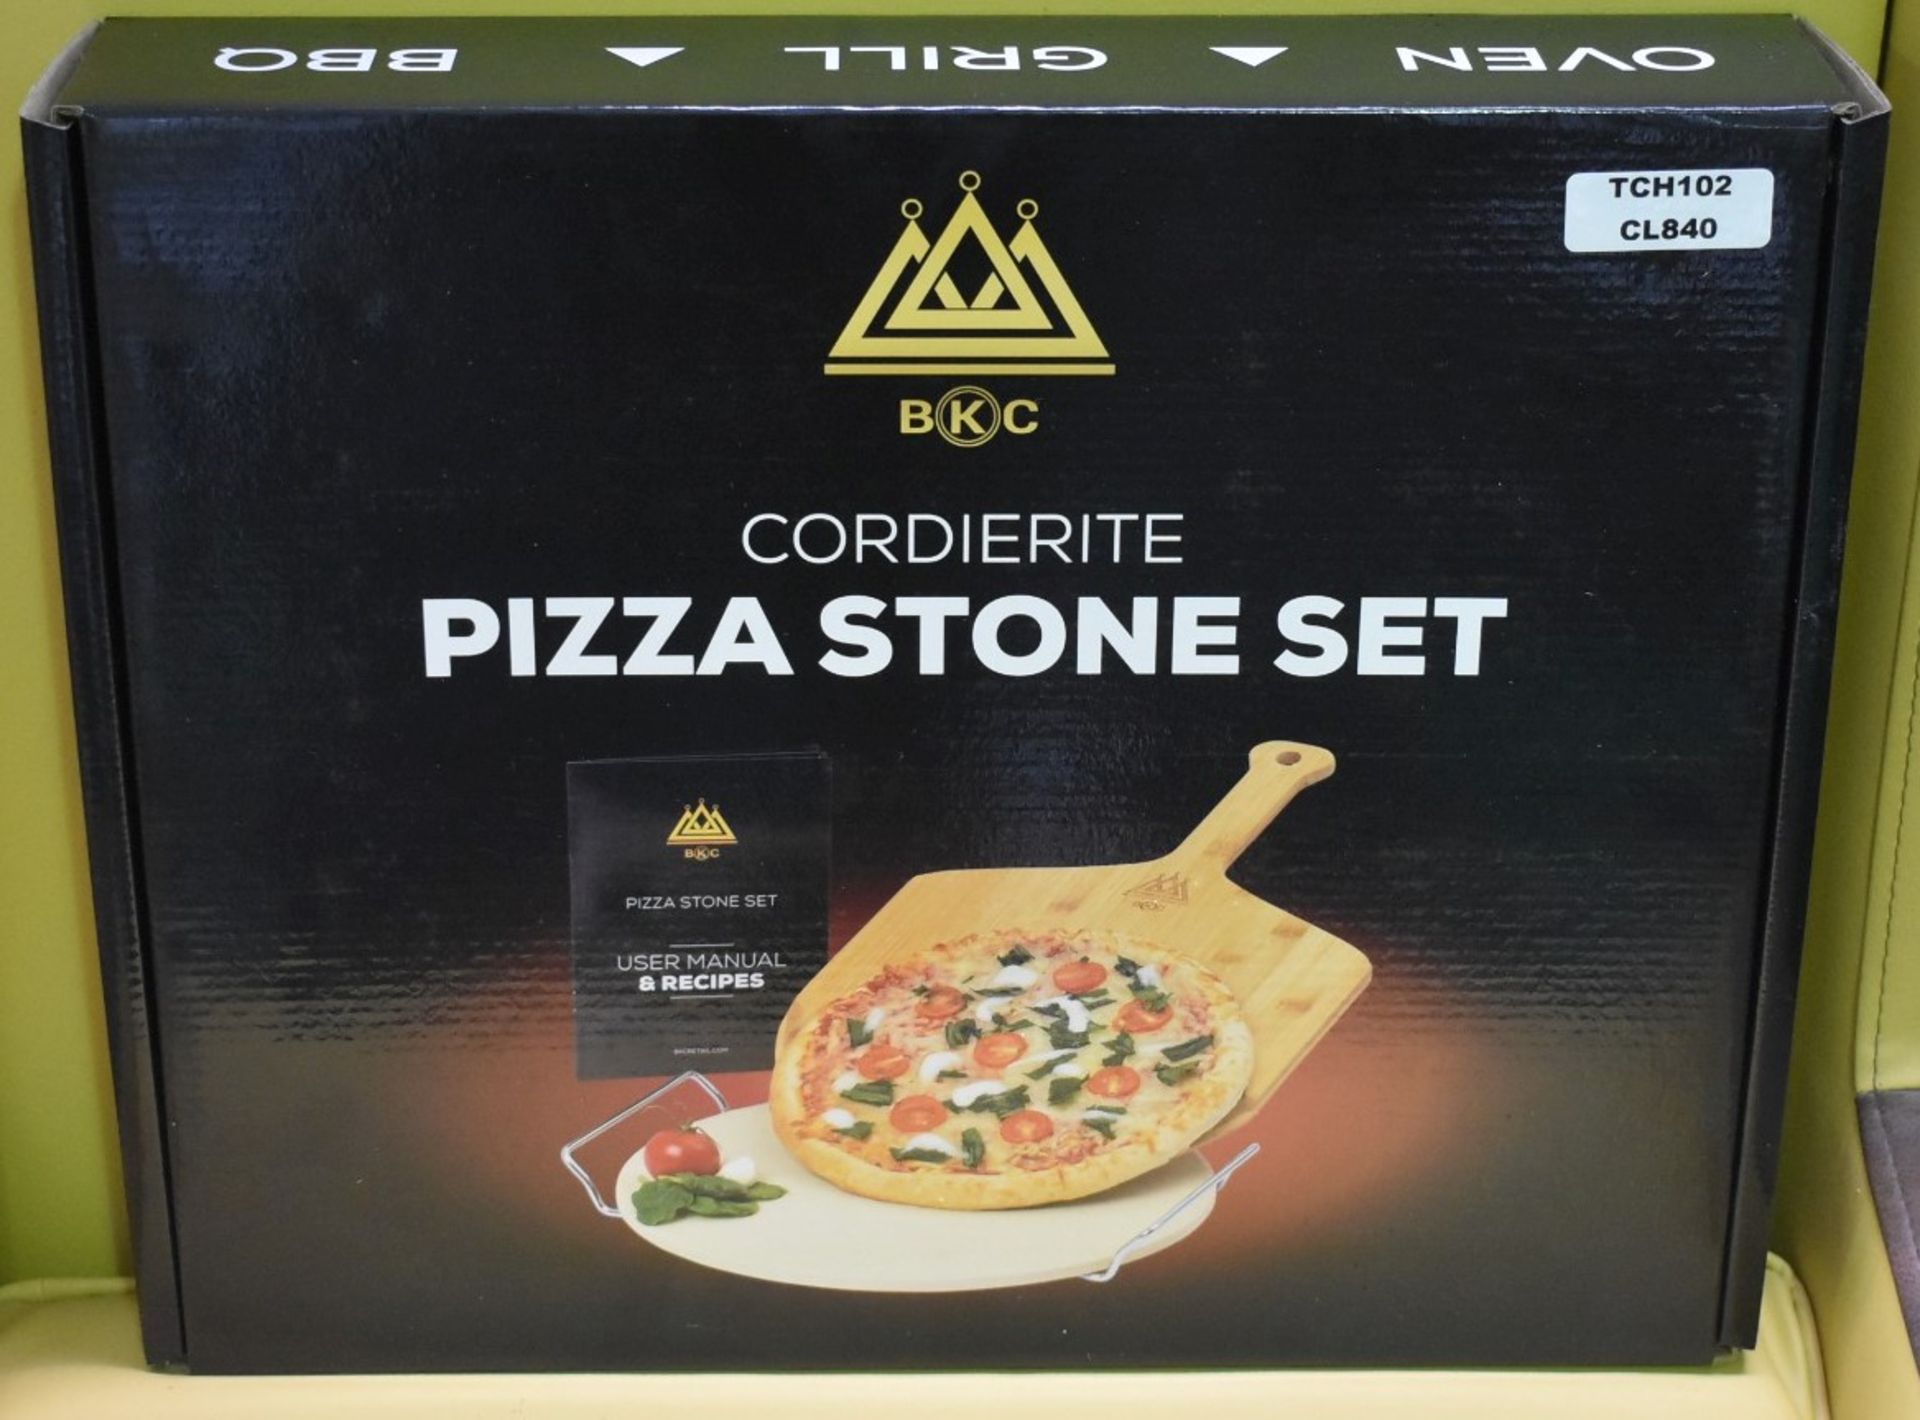 1 x BKC Cordierite Pizza Stone Set - Includes Pizza Stone, Paddle, Wire Rack and Recipe Manual - New - Image 3 of 6